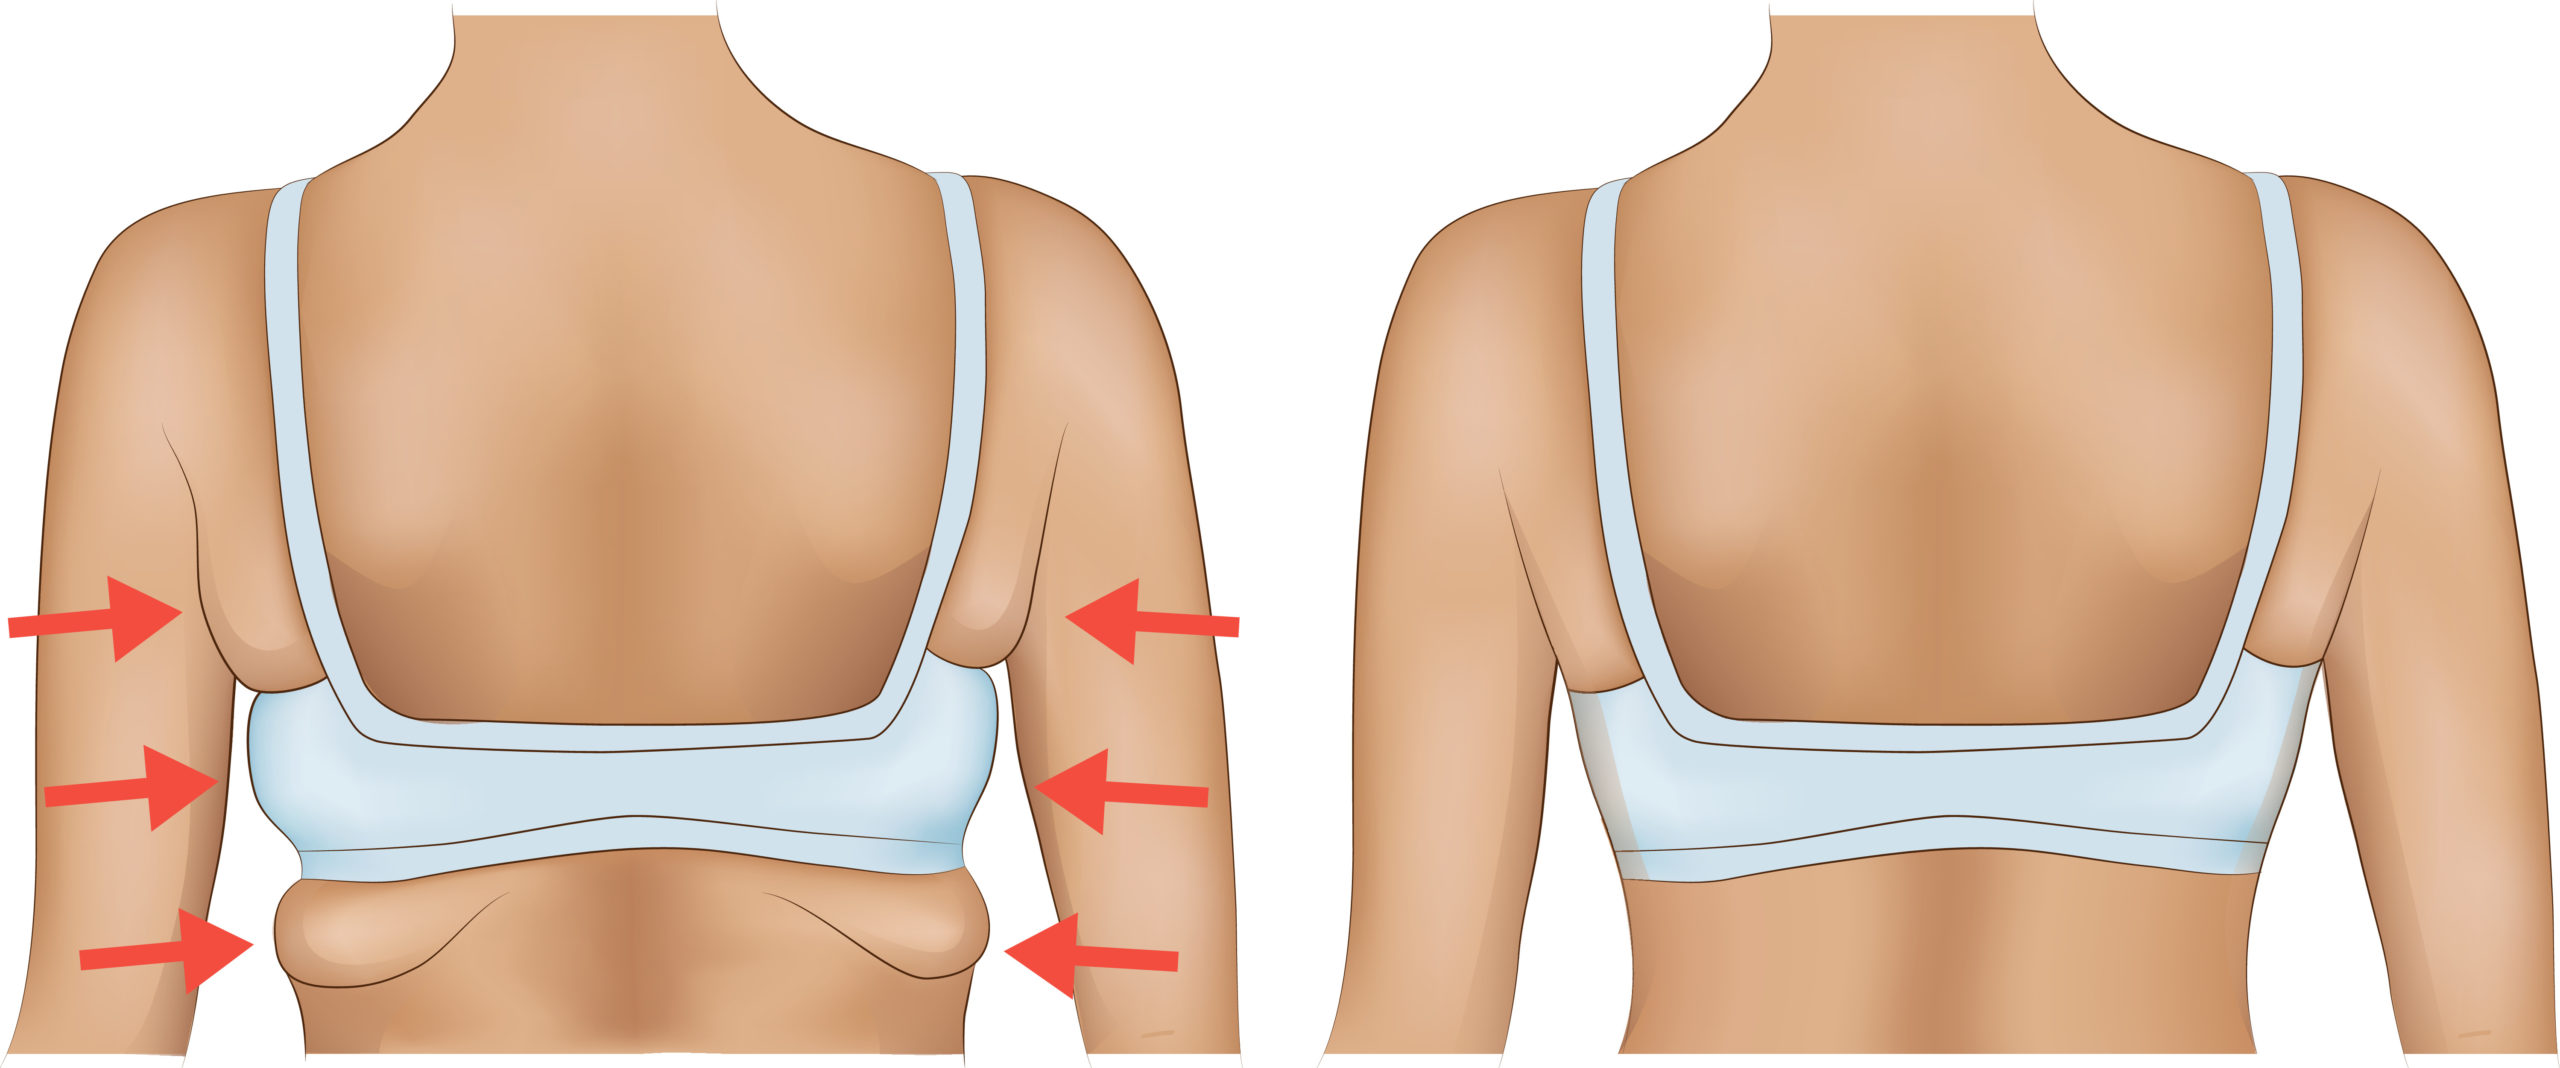 How to get rid of a bra bulge fast - Quora